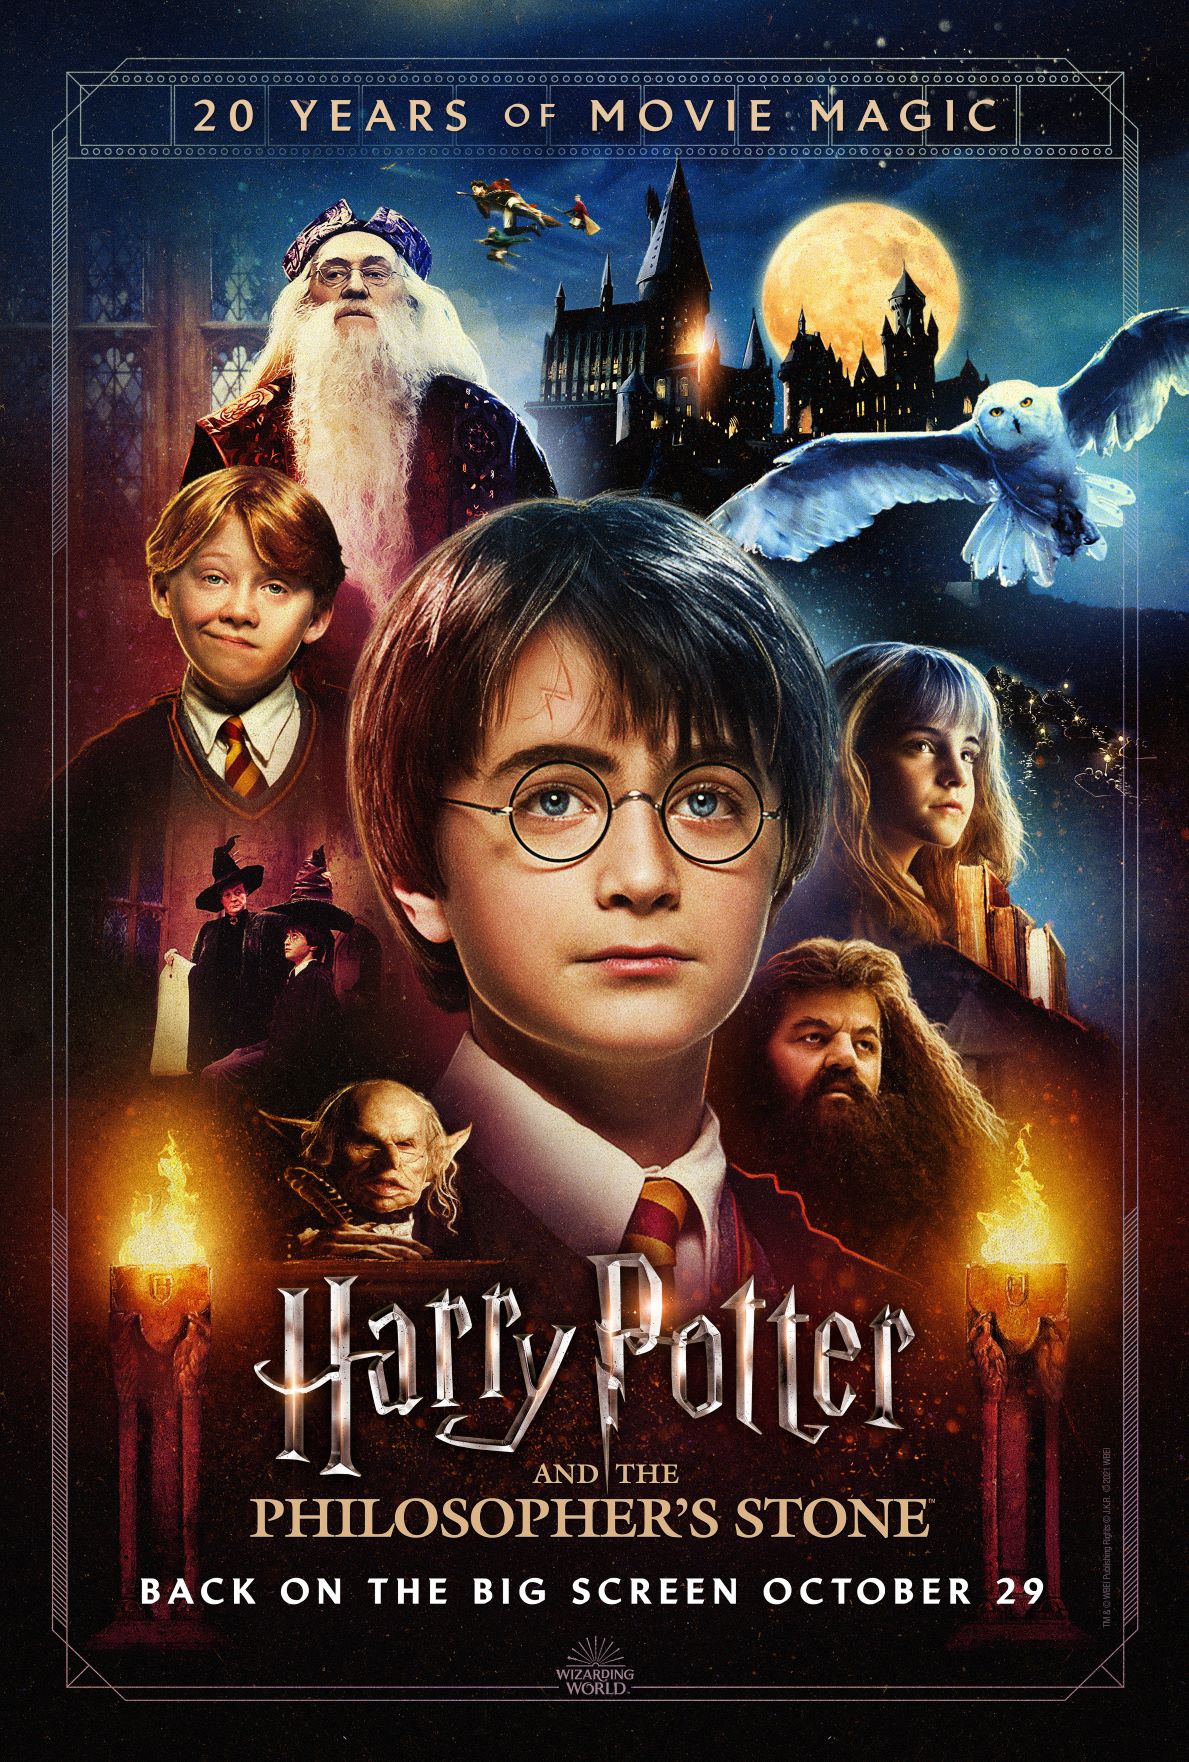 harry potter and the philosopher's stone film review essay